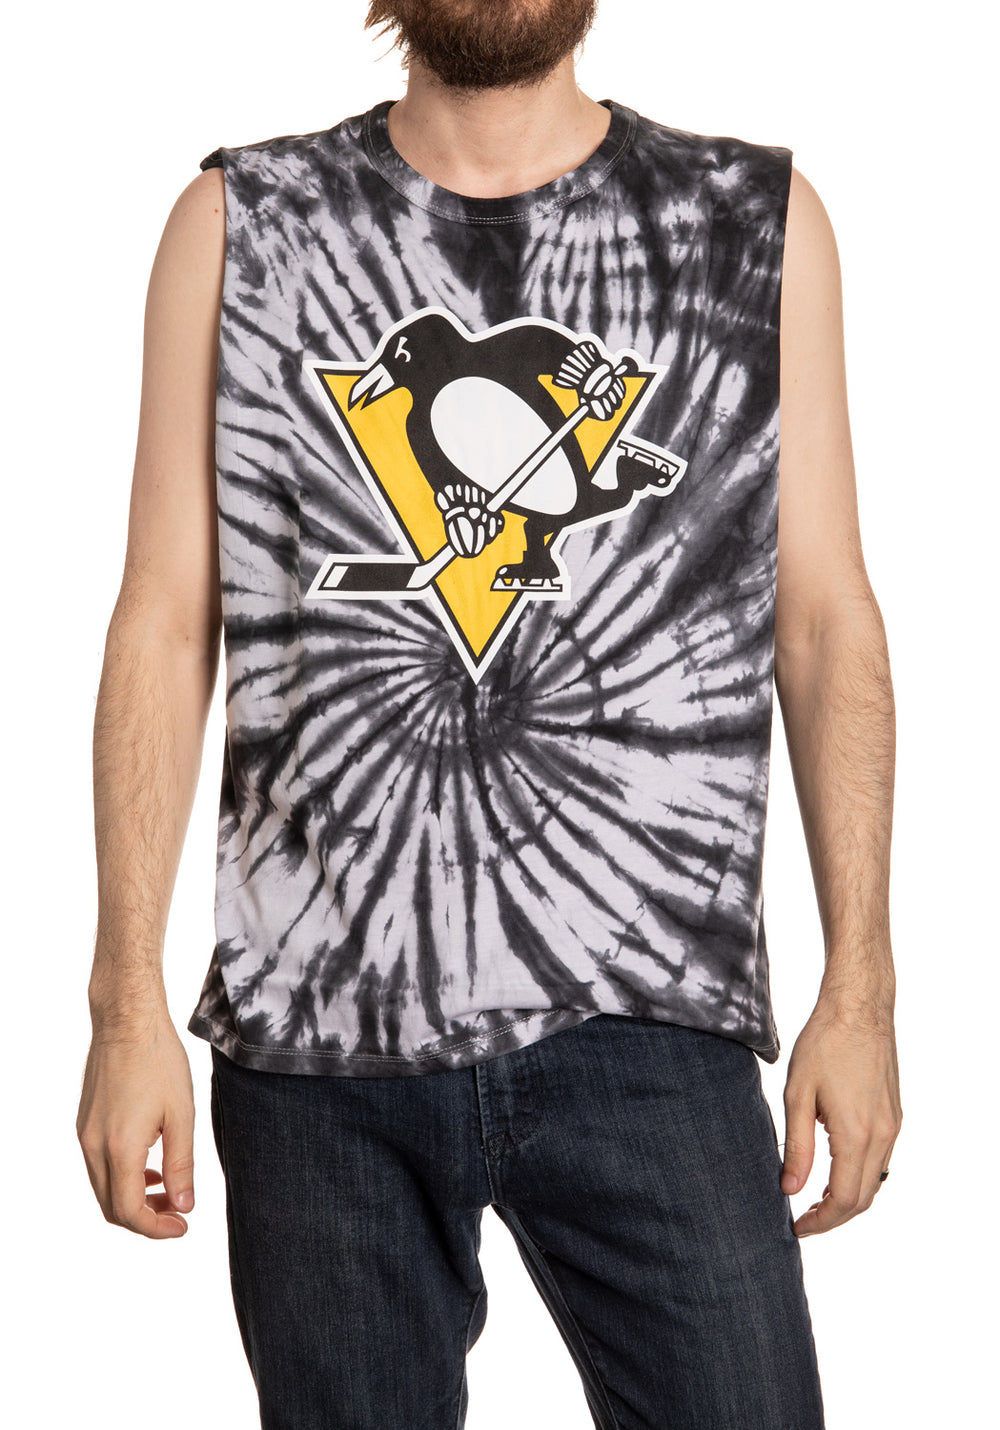 Pittsburgh Penguins Spiral Tie Dye Sleeveless Shirt Front View